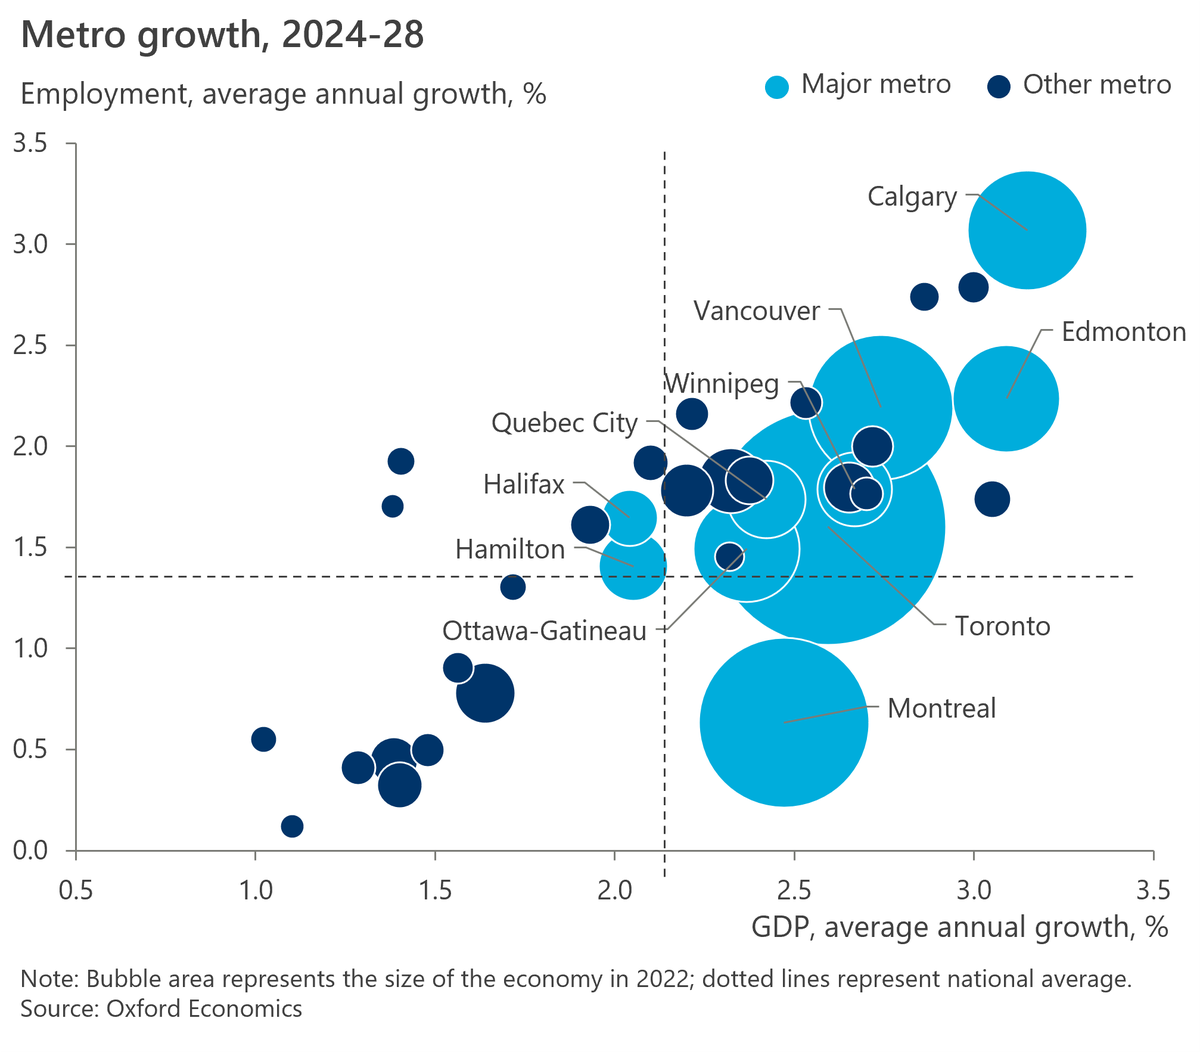 Despite current challenges , many #cities in #Canada are set to experience strong #GDP & #employment growth in the medium term. #Calgary will be the fastest-growing Canadian metro. #Vancouver & #Toronto will also be strong performers. Read more: okt.to/t5EyRl